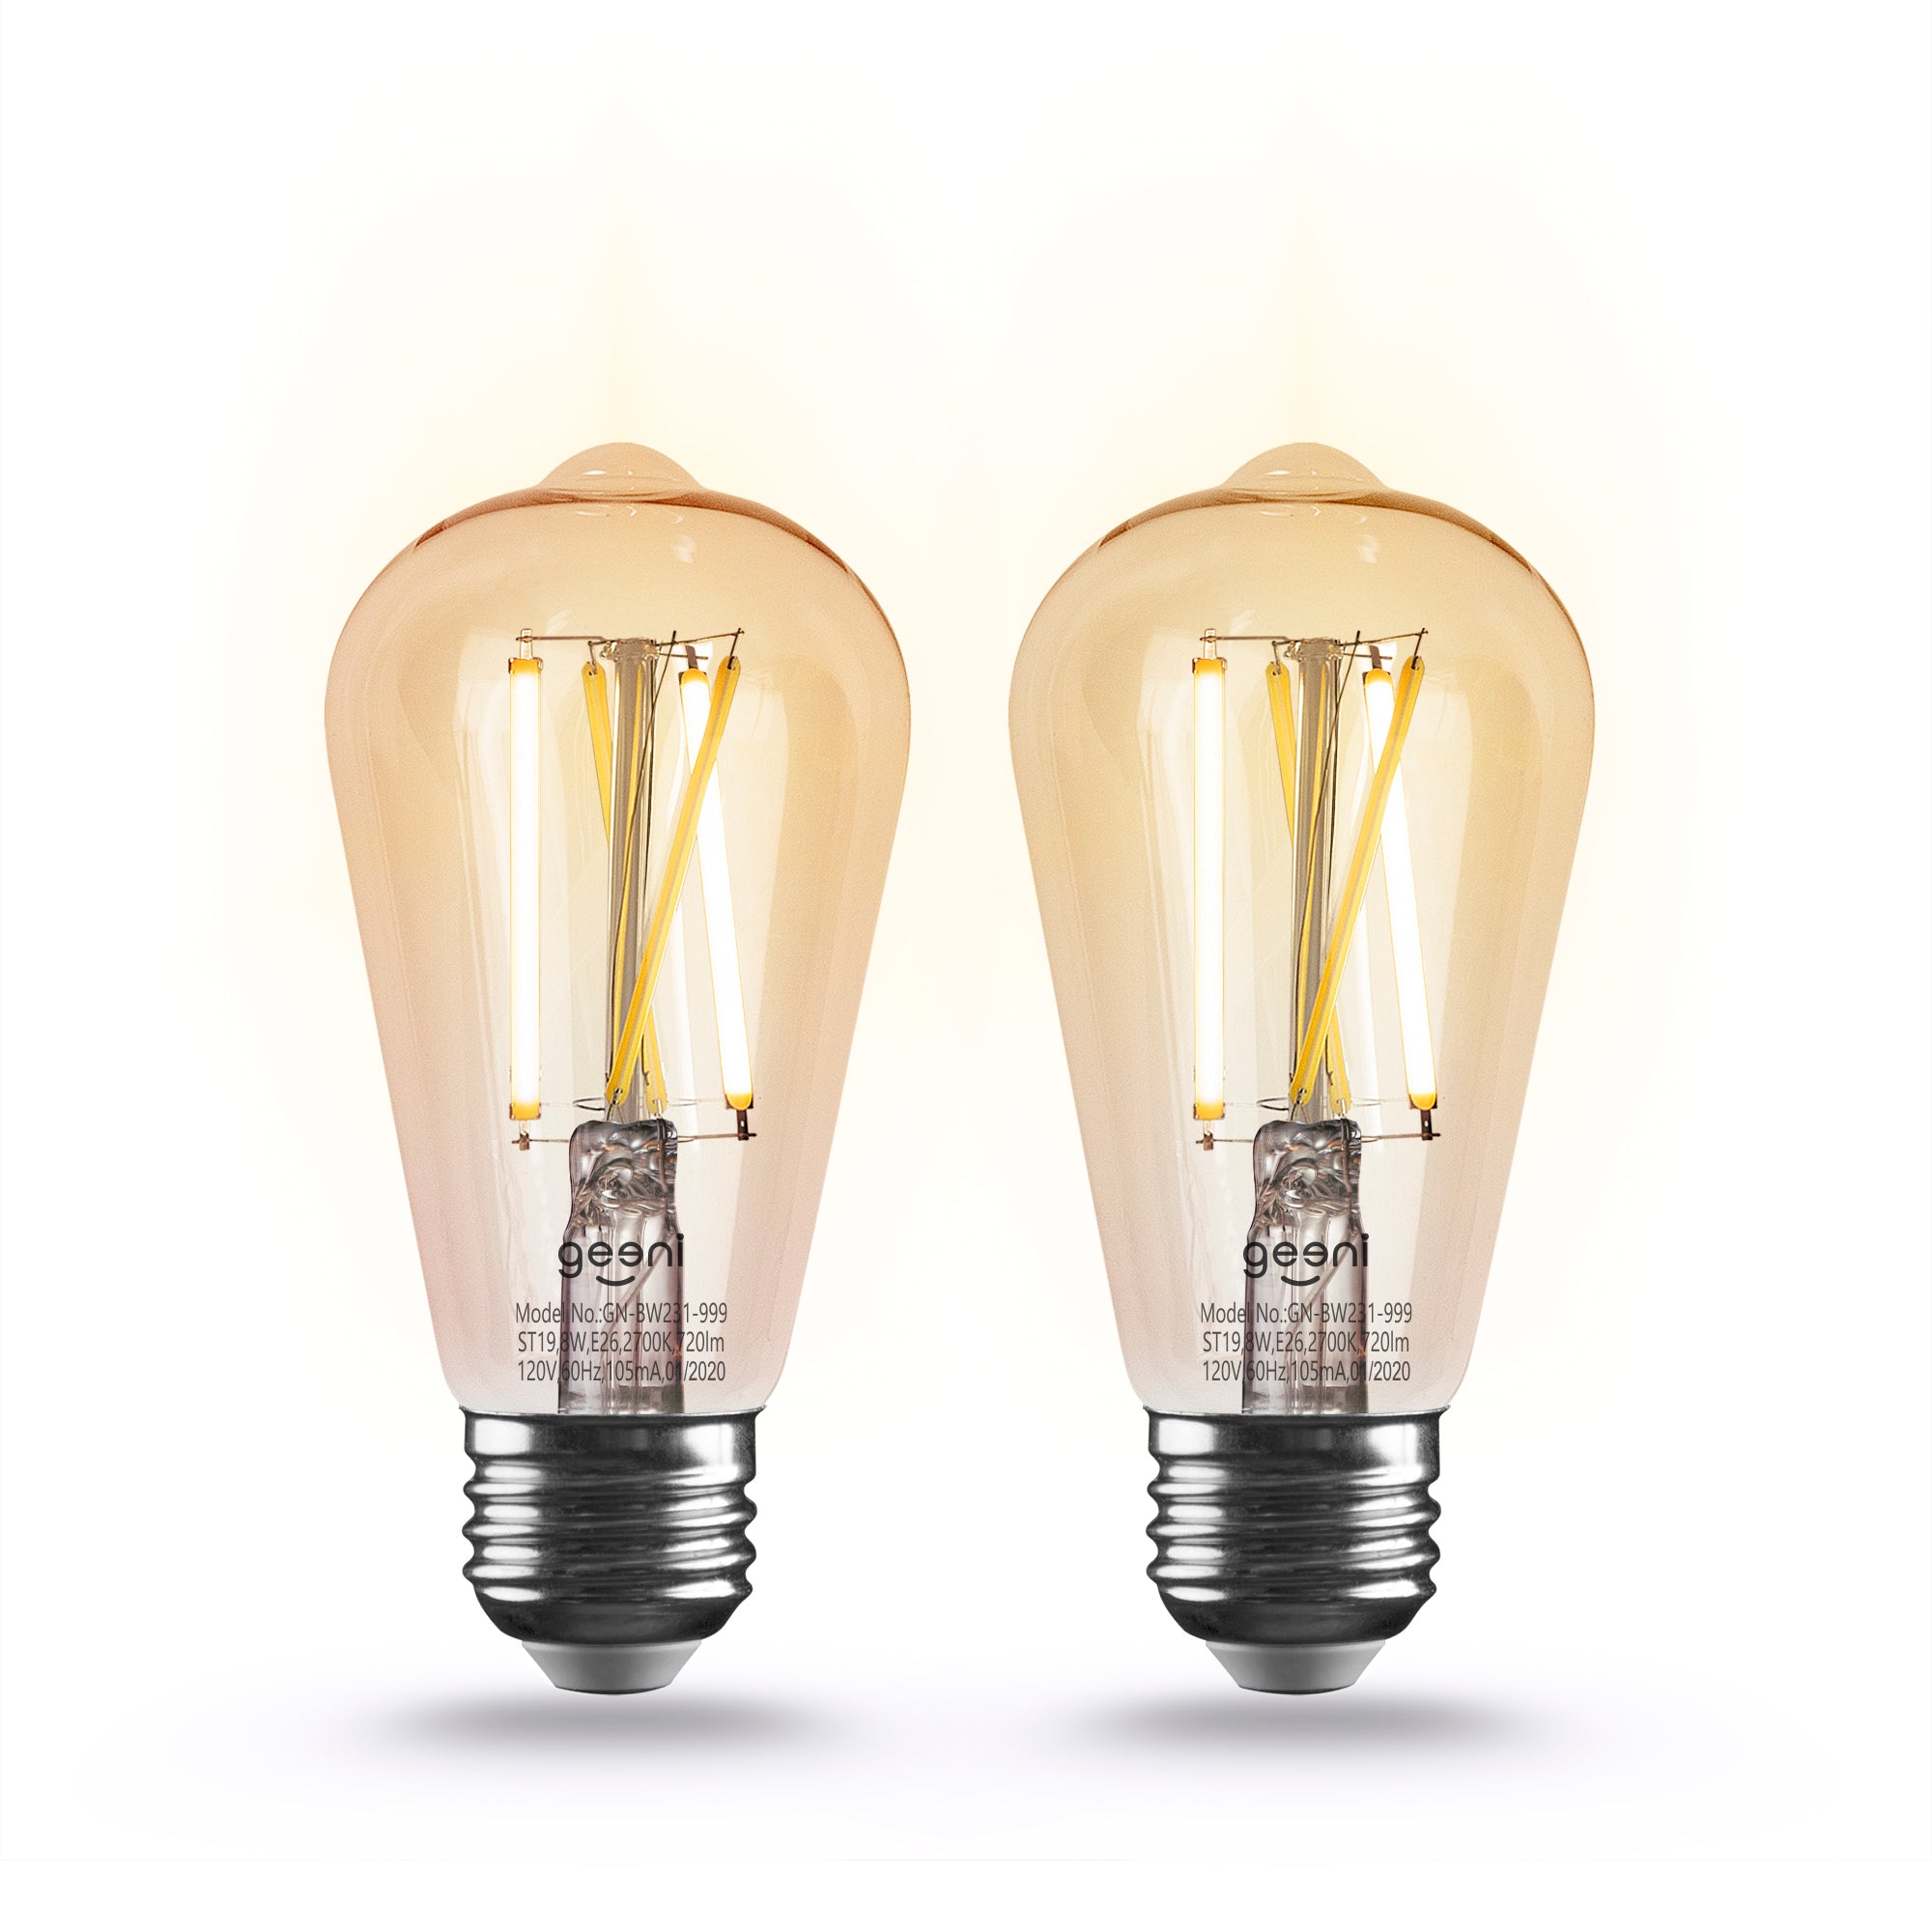 Geeni LUX Edison 60W Equivalent White Dimmable Tunable ST19 E26 Amber Smart LED Bulb (2-Pack)